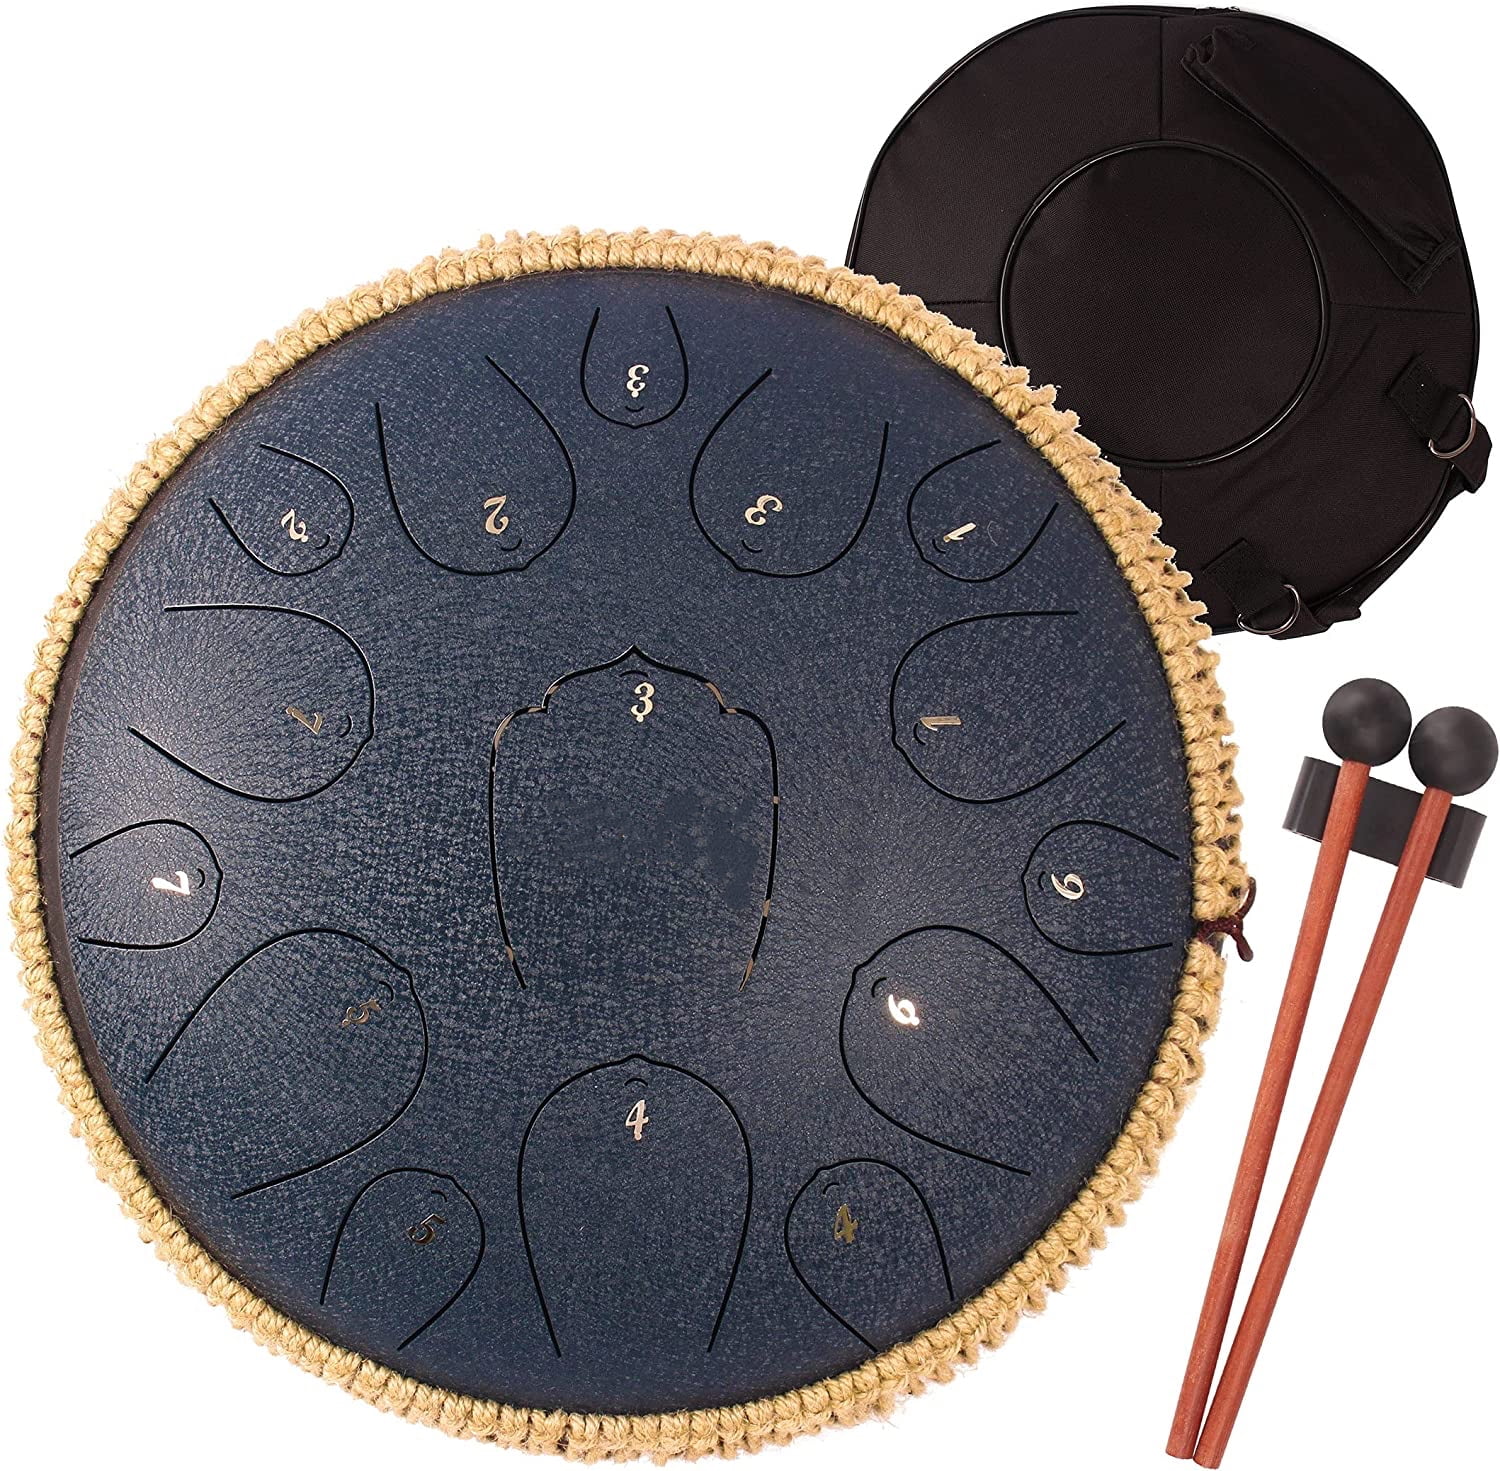 Harmonic Handpan Drum 9 Notes Steel Tongue Drum 22 Inches Percussion  Instrument for Sound Performance in Minor D Hand pan Steel Drum andmade  Healing